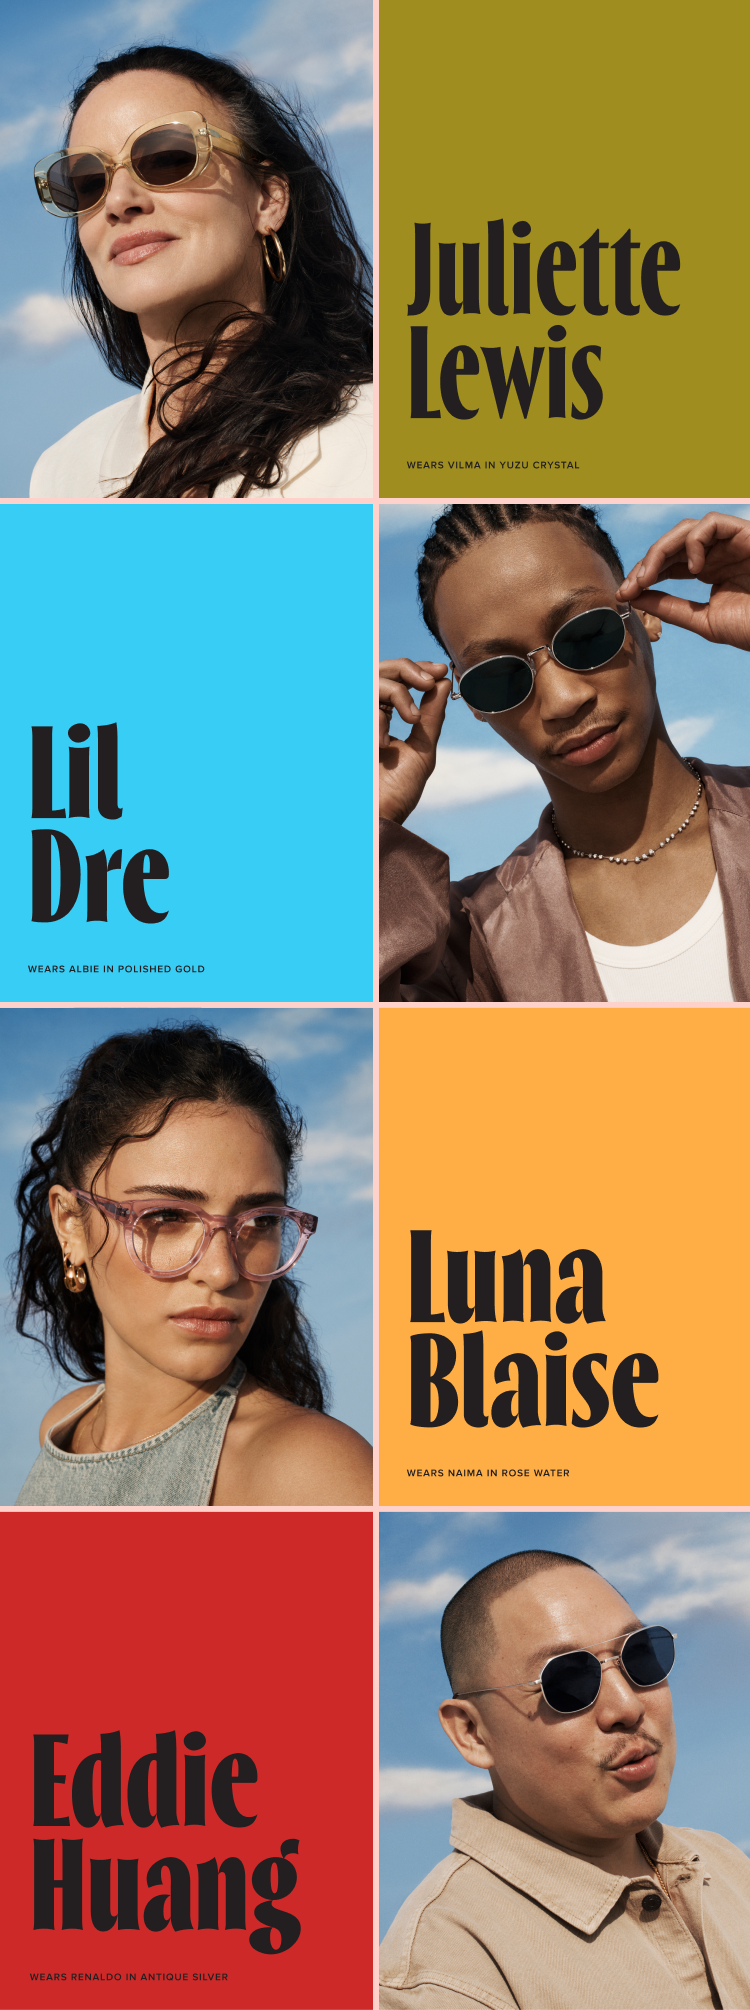 Clockwise from top left: Juliette Lewis wears the Vilma frame in Yuzu Crystal, Lil Dre wears the Albie frame in Polished Gold, Eddie Huang wears the Renaldo frame in Antique Silver, and Luna Blaise wears the Naima frame in Rose Water.